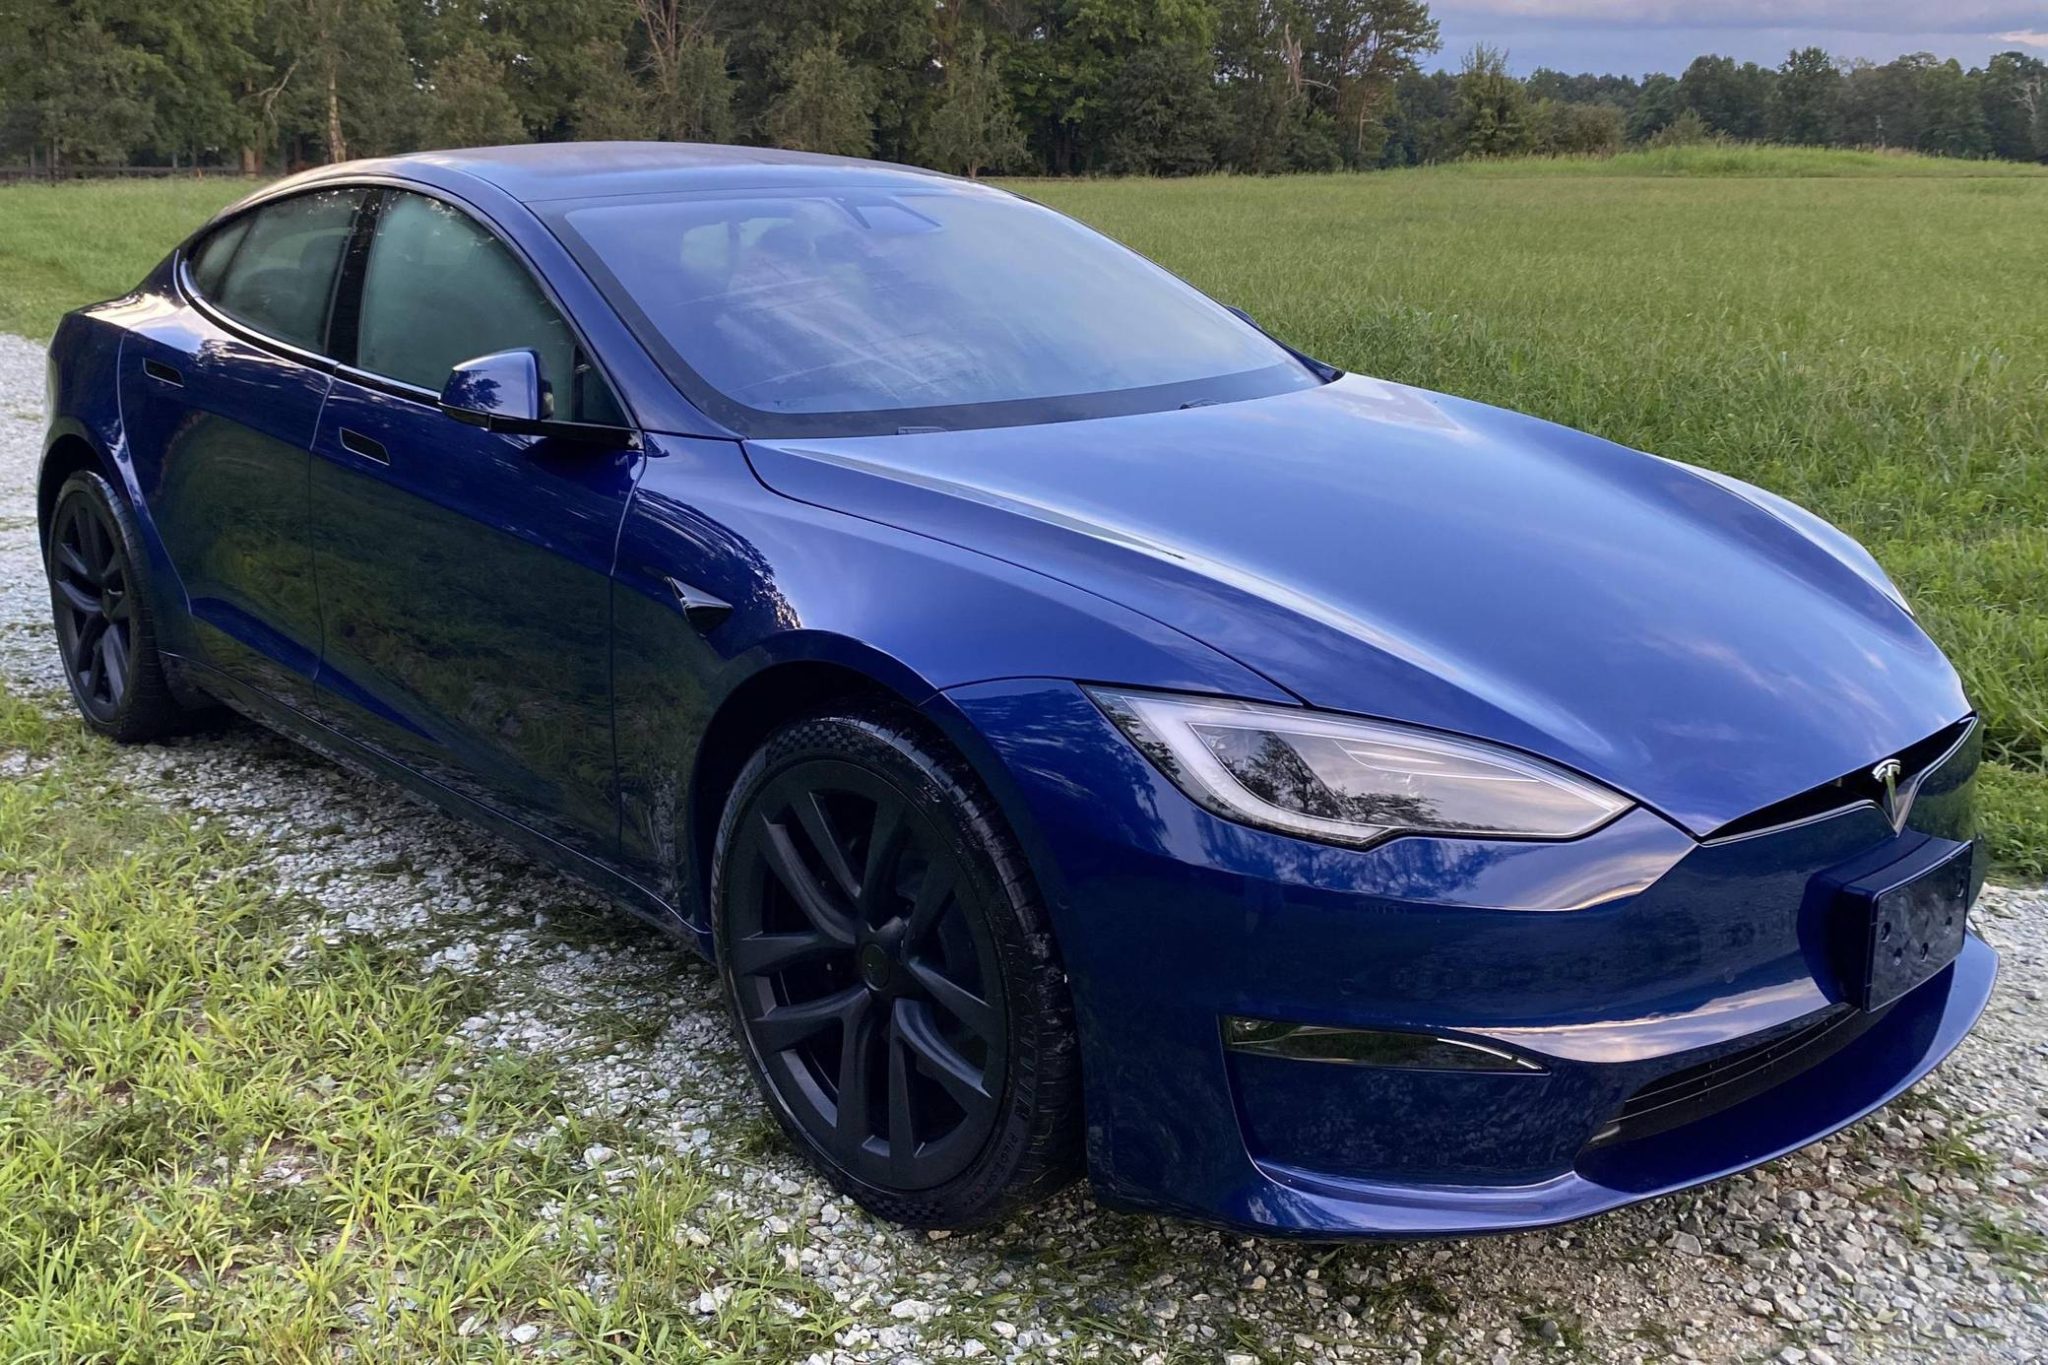 Front-angled view of a blue Tesla Model S